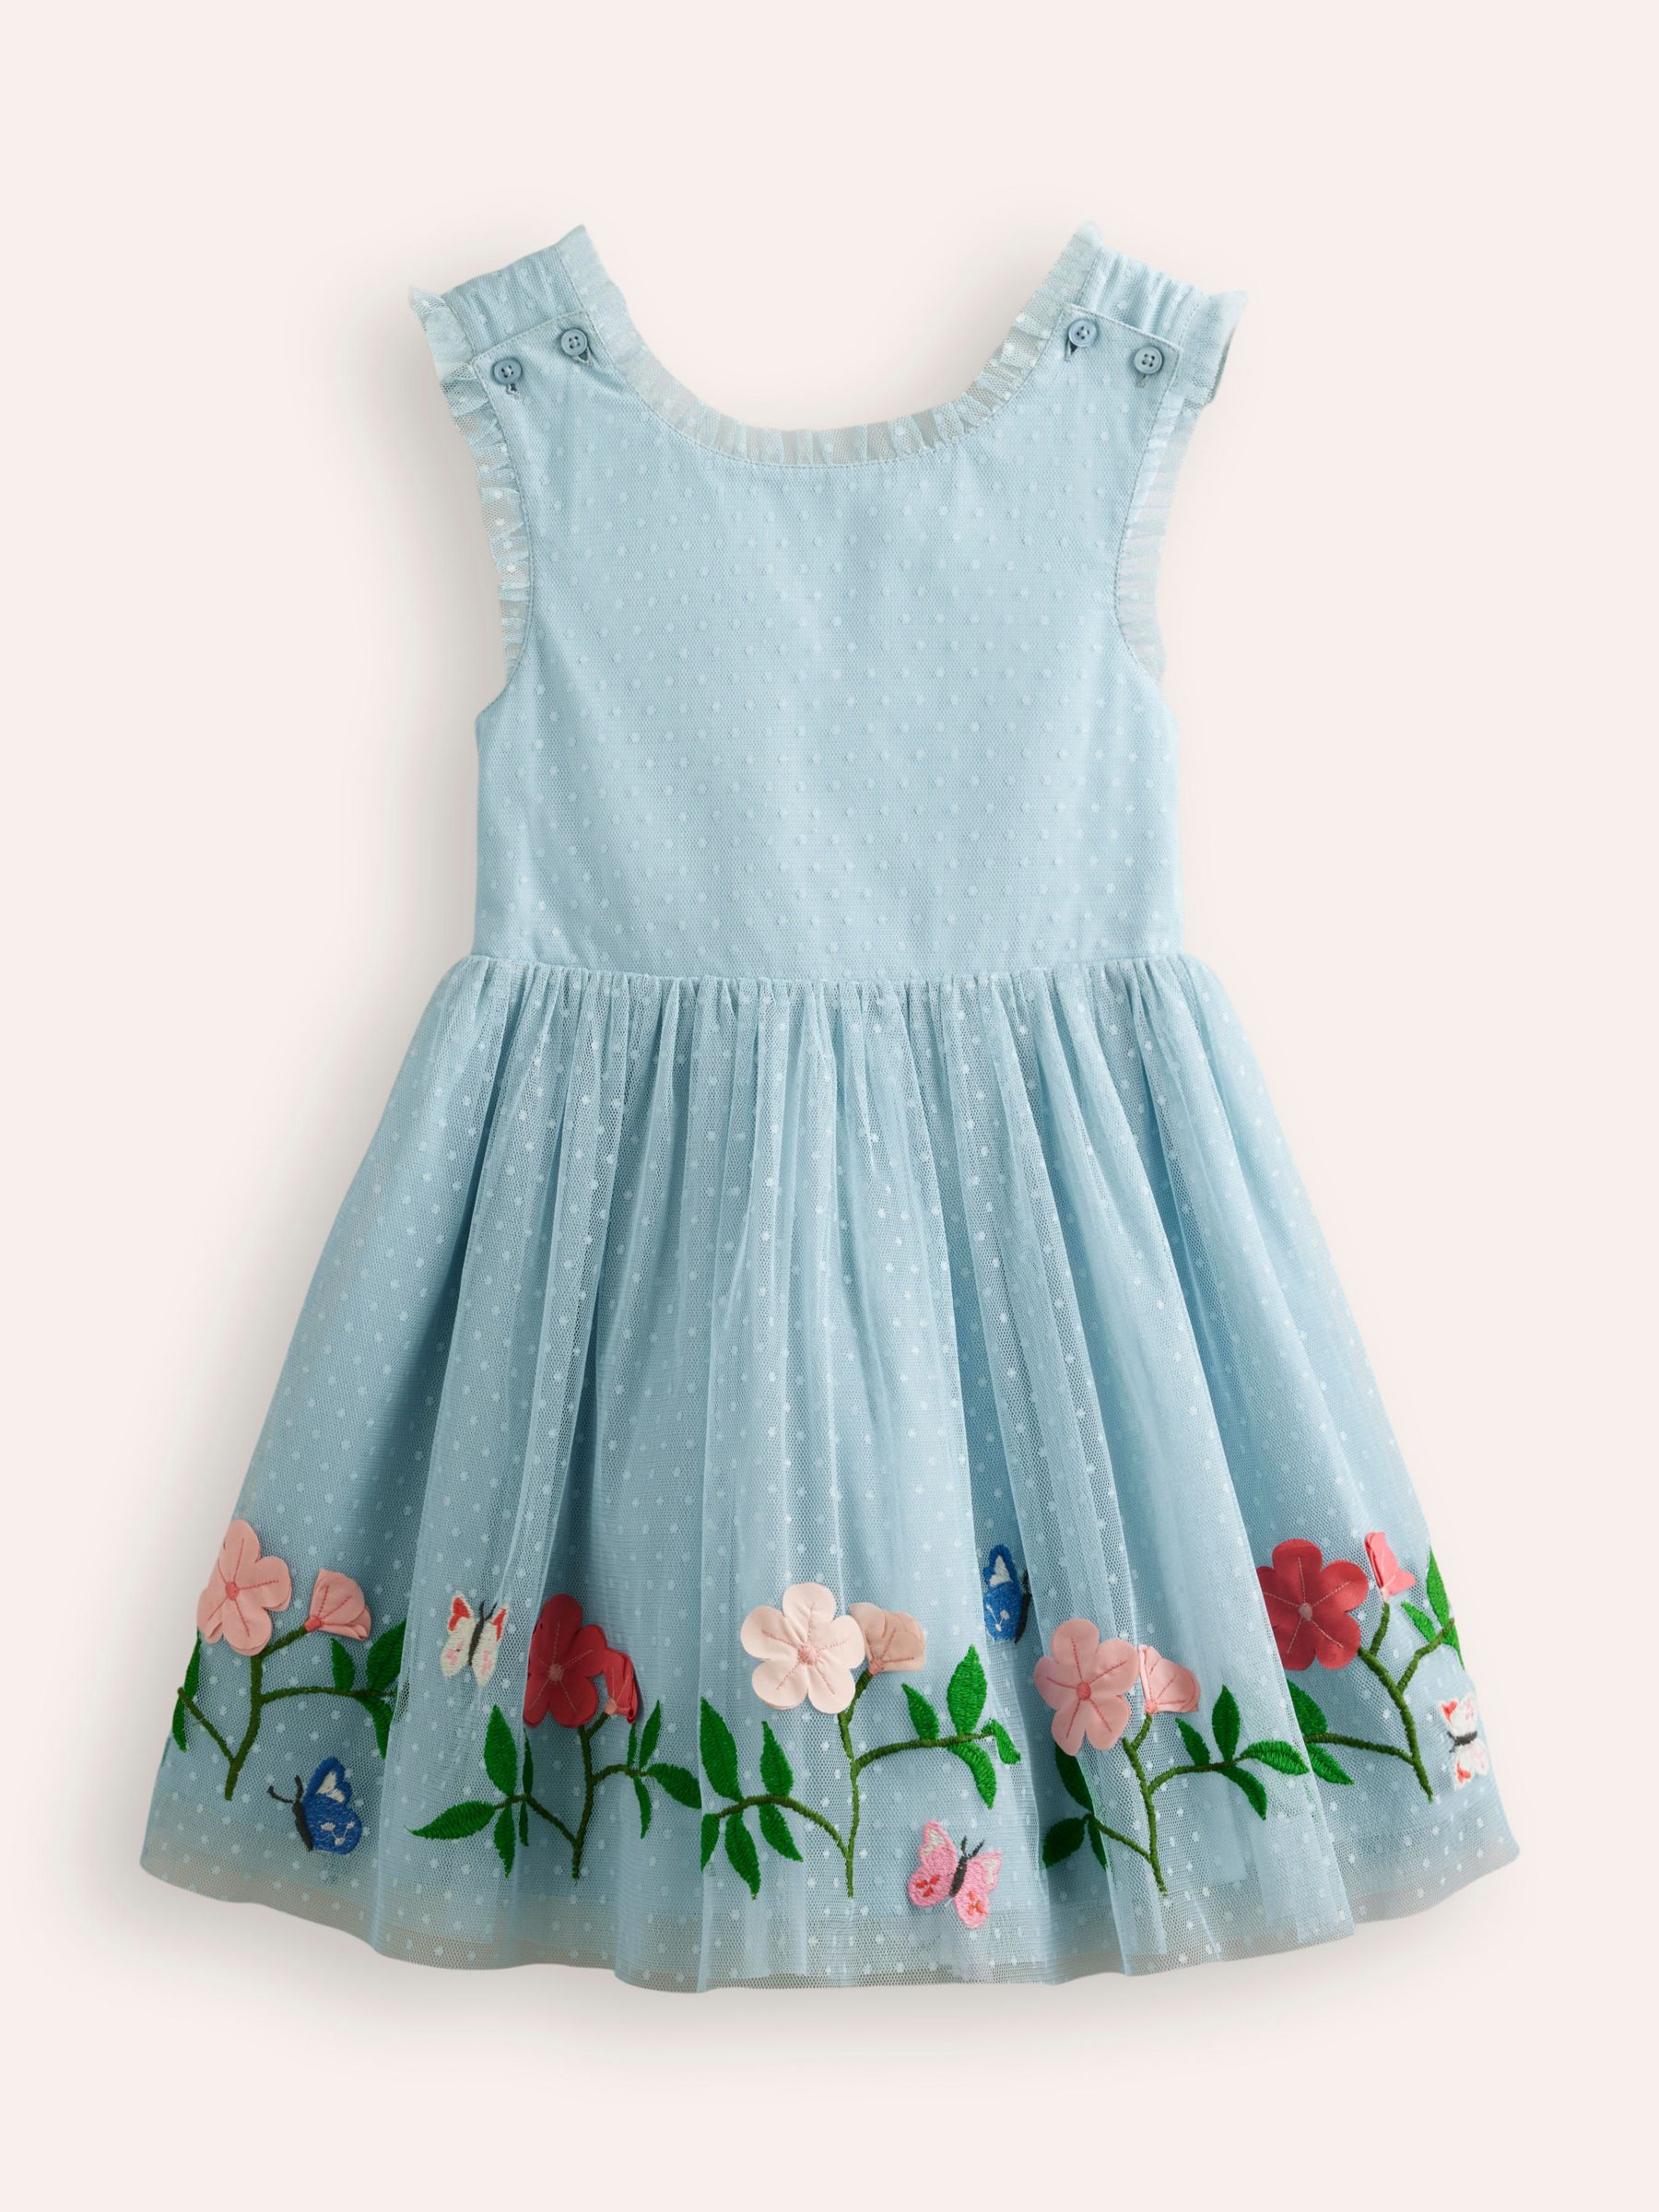 Mini Boden Kids' Tulle Floral Embroidered Cross Back Dress, Vintage Blue, 2-3 years